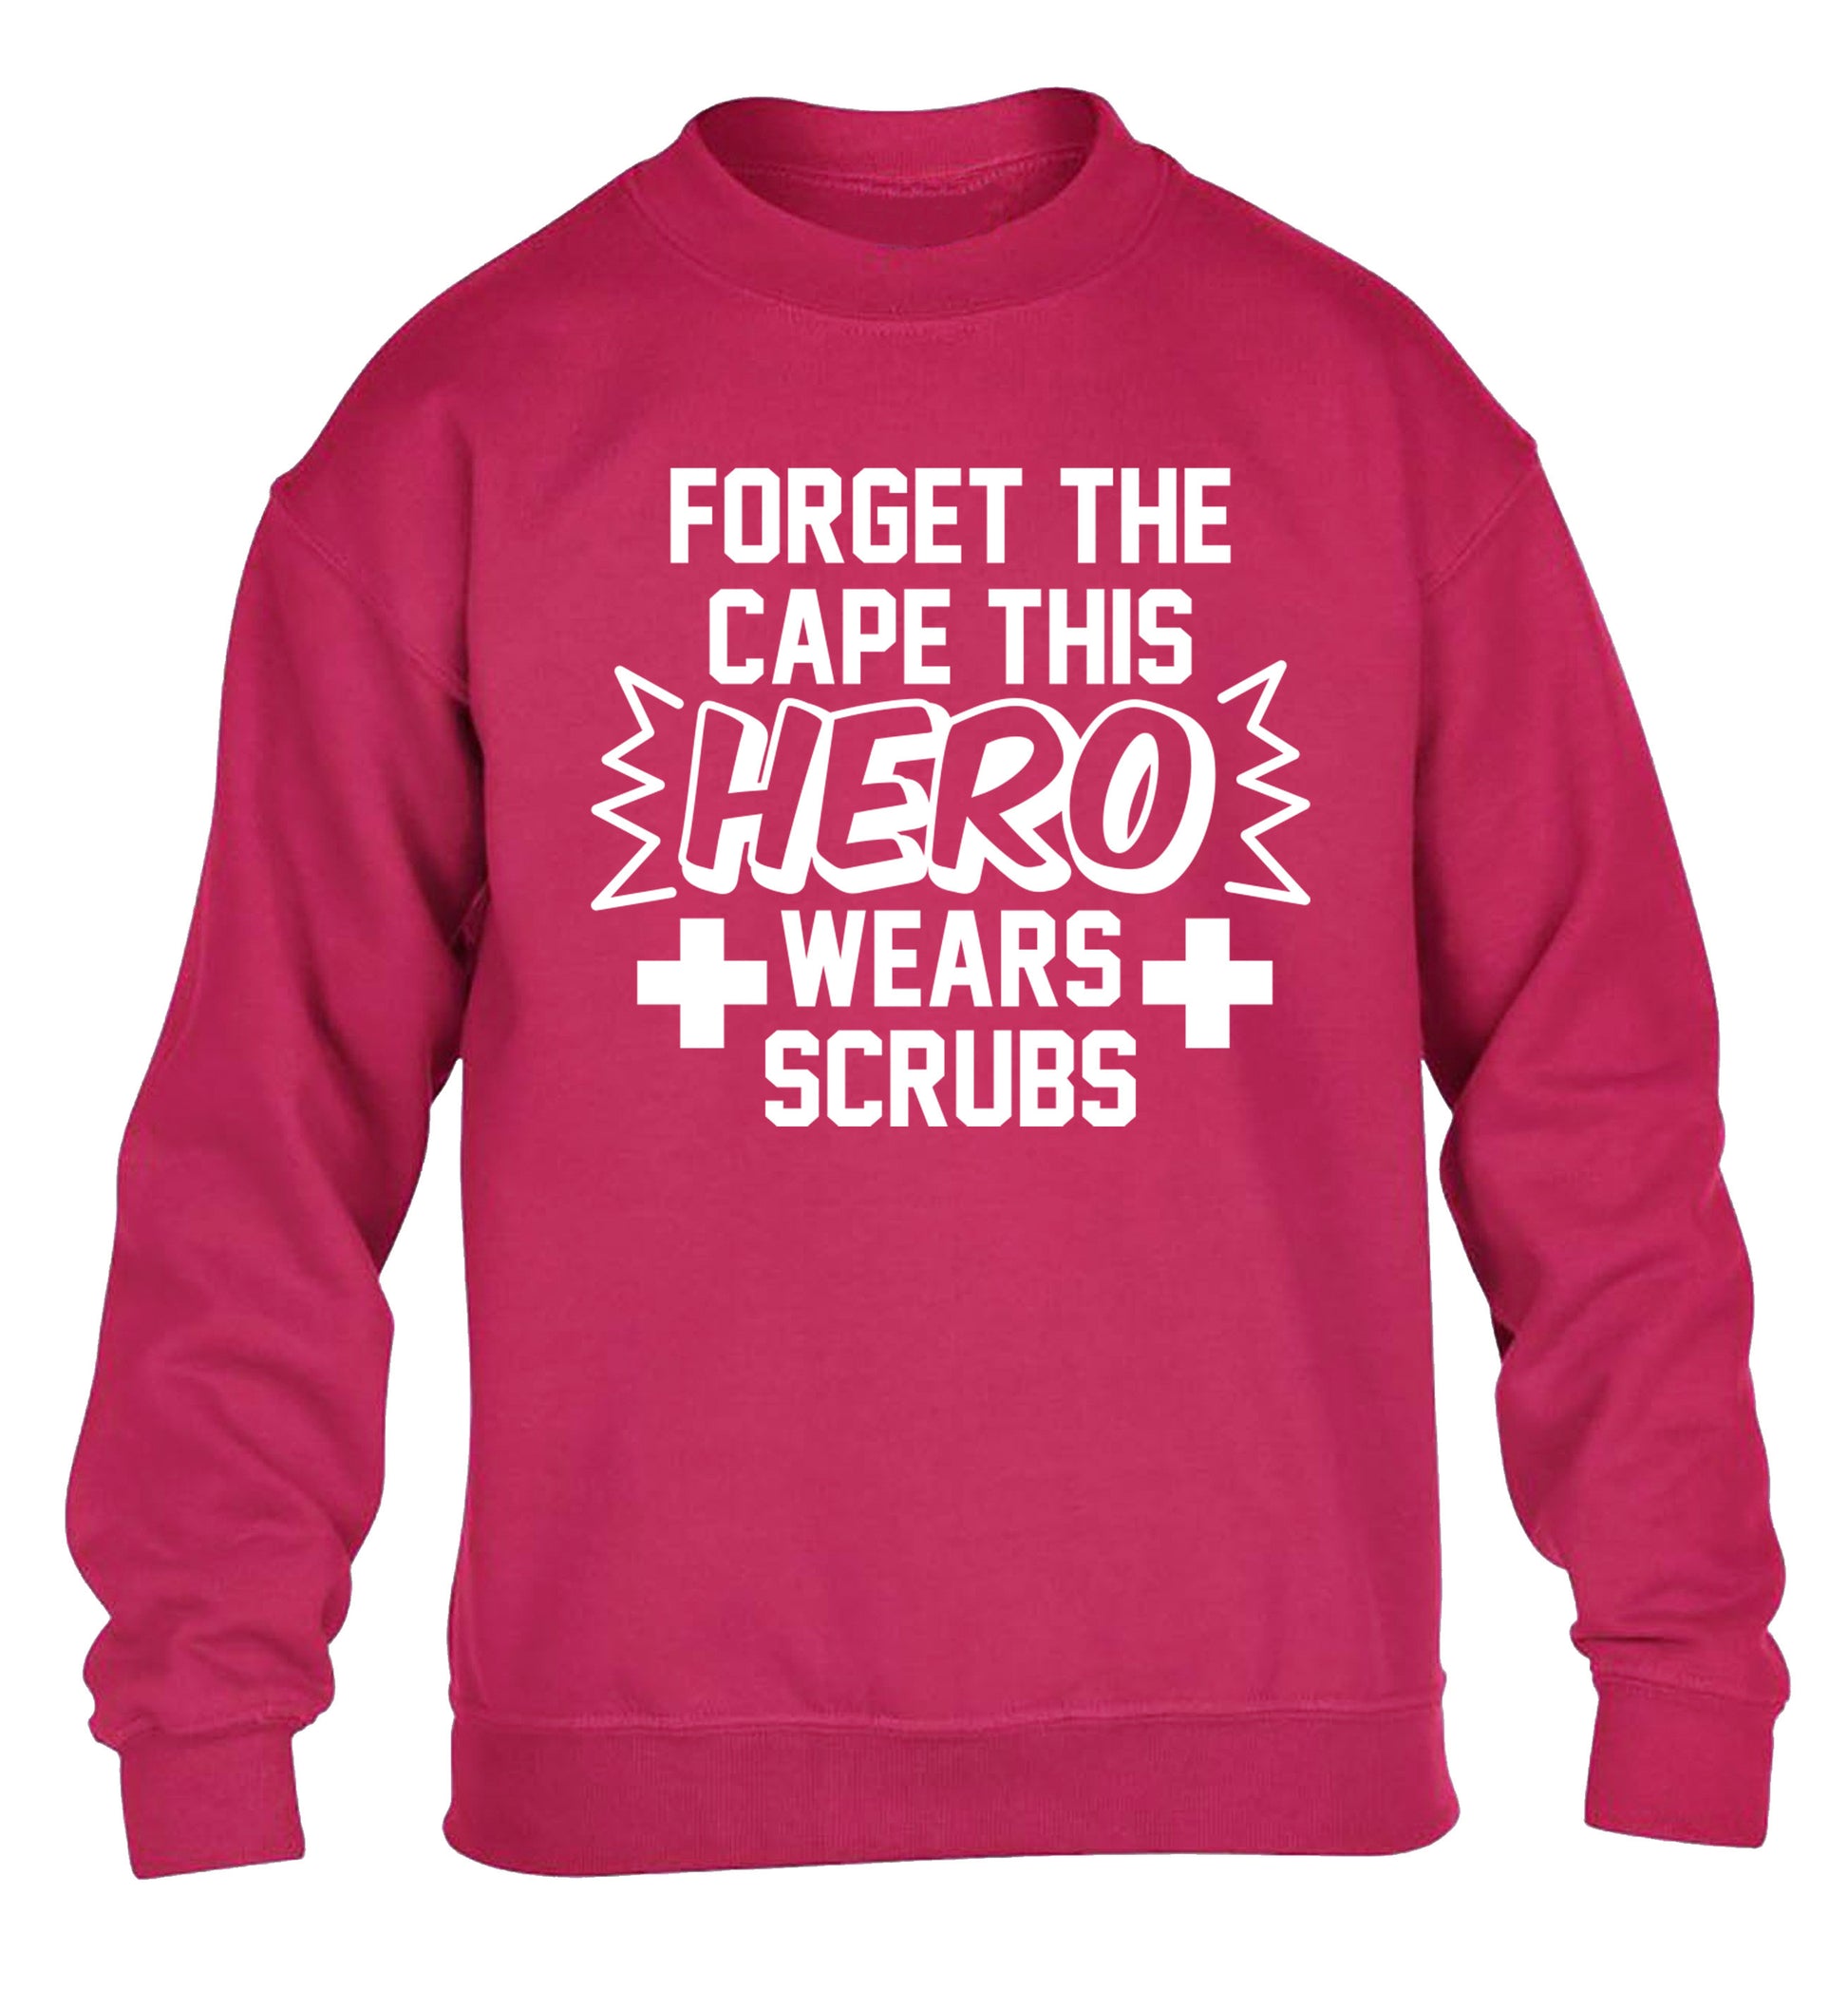 Forget the cape this hero wears scrubs children's pink sweater 12-14 Years